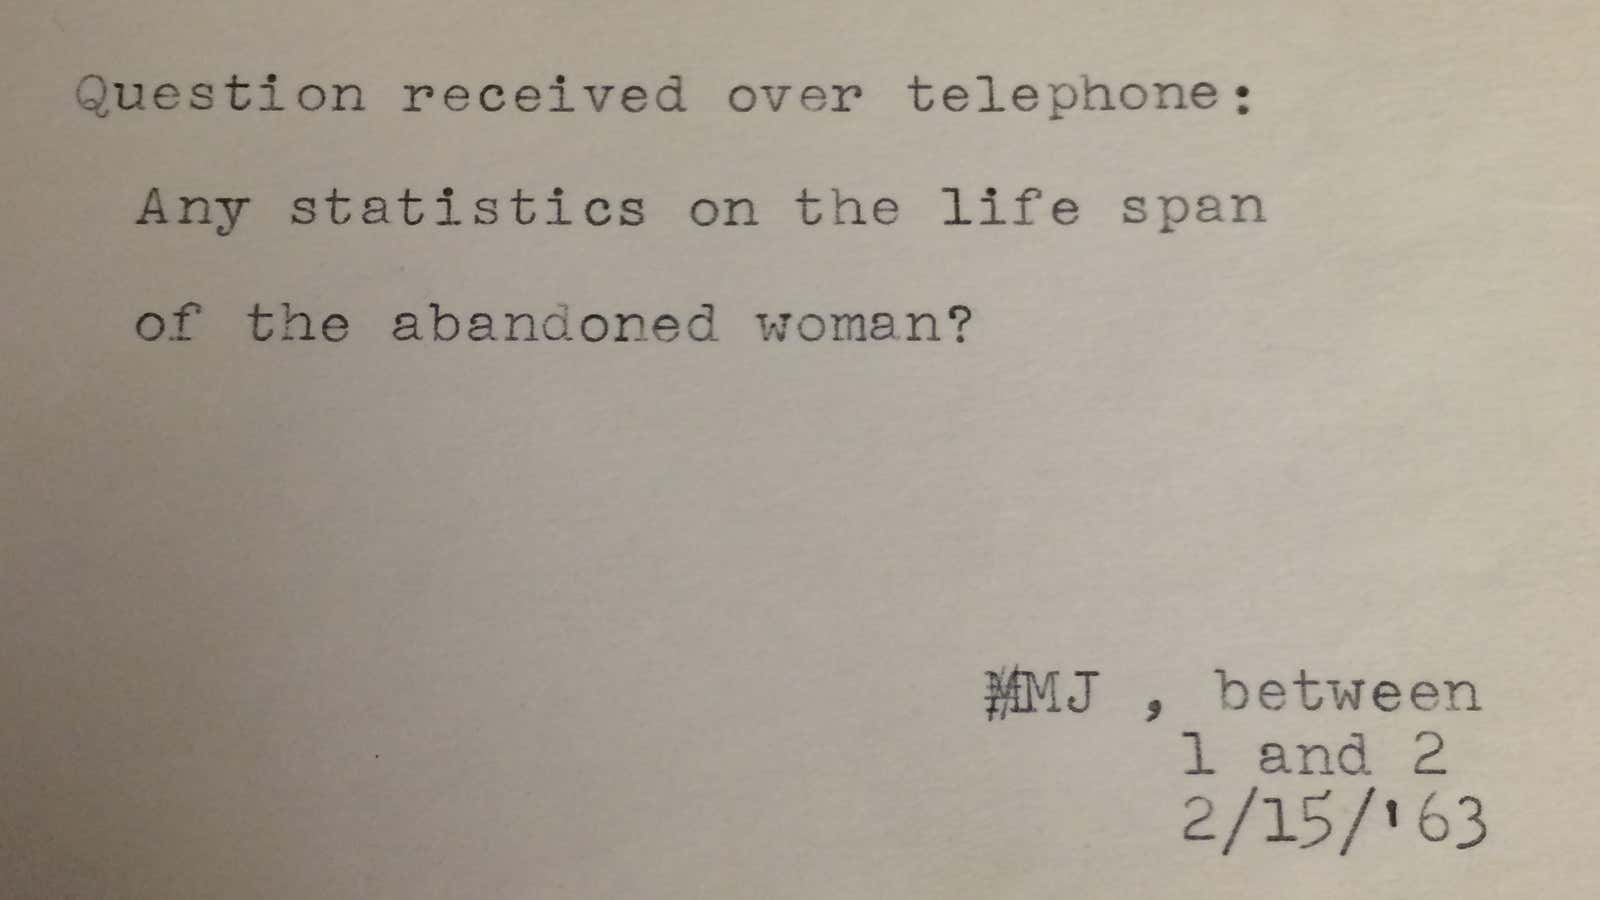 The New York Public Library’s little-known “human Google” service answers any question by phone